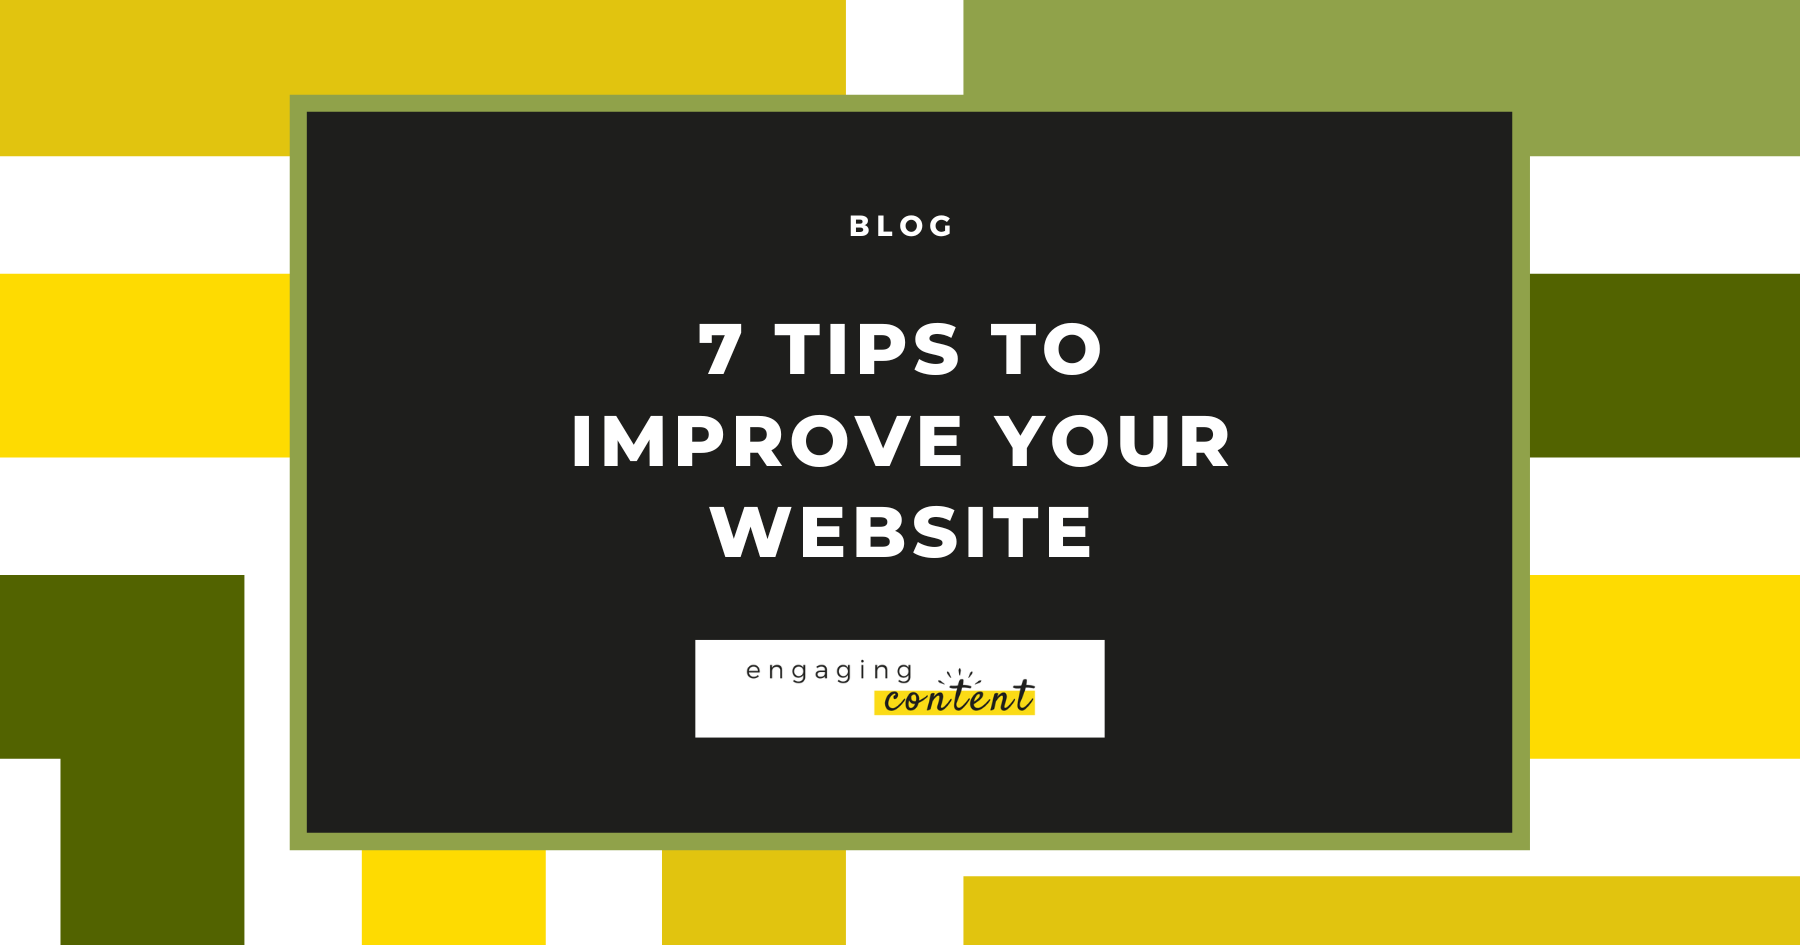 7 tips to improve your website